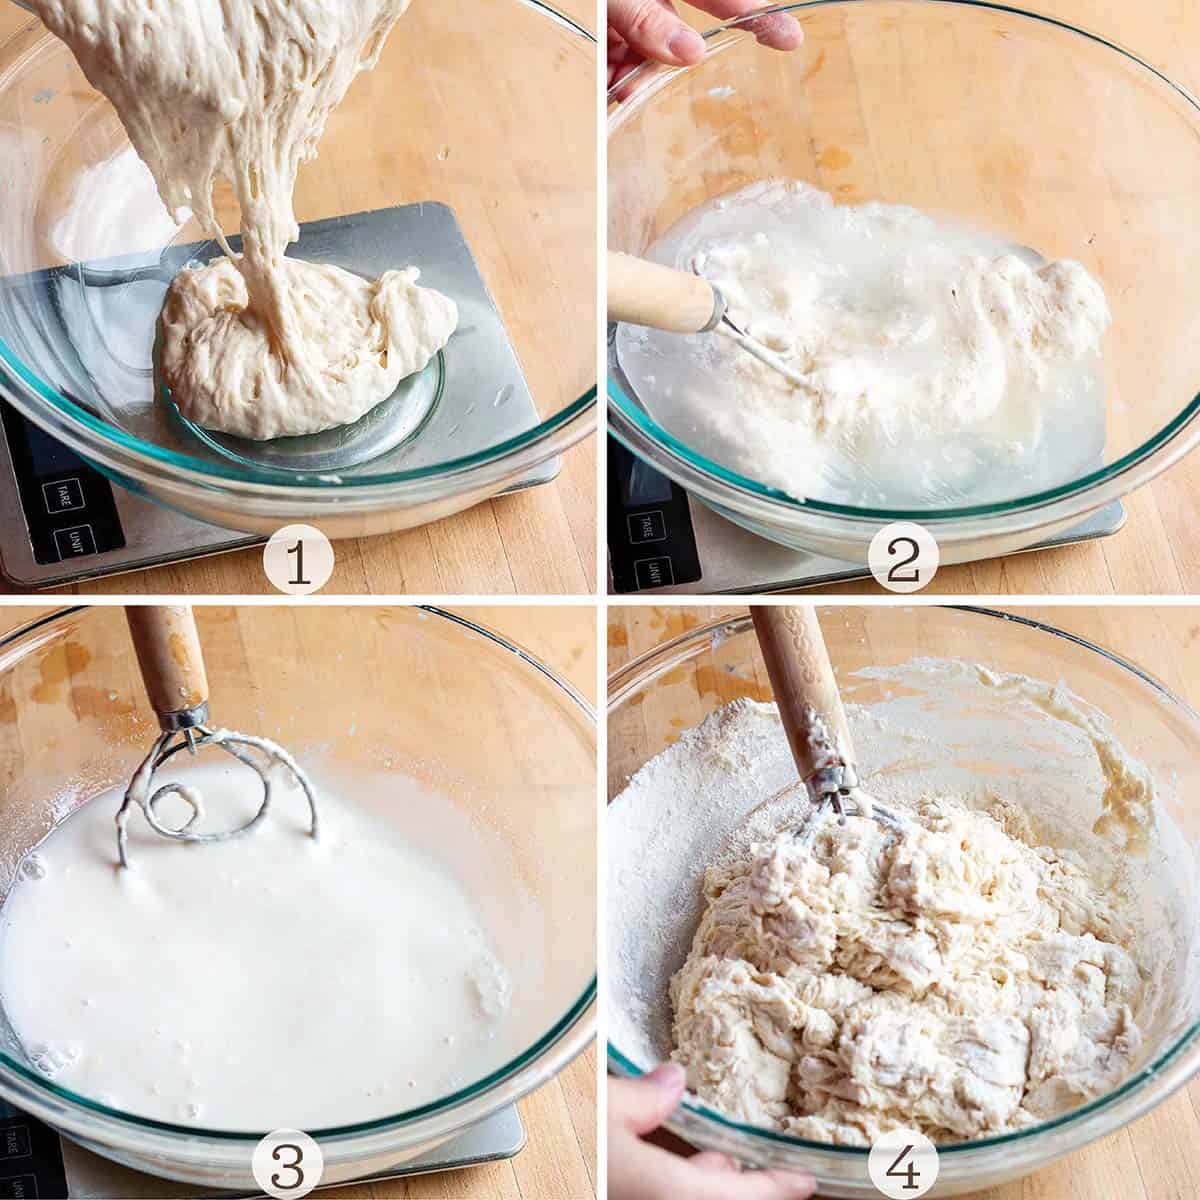 Four images of sourdough starter being mixed with water and flour.